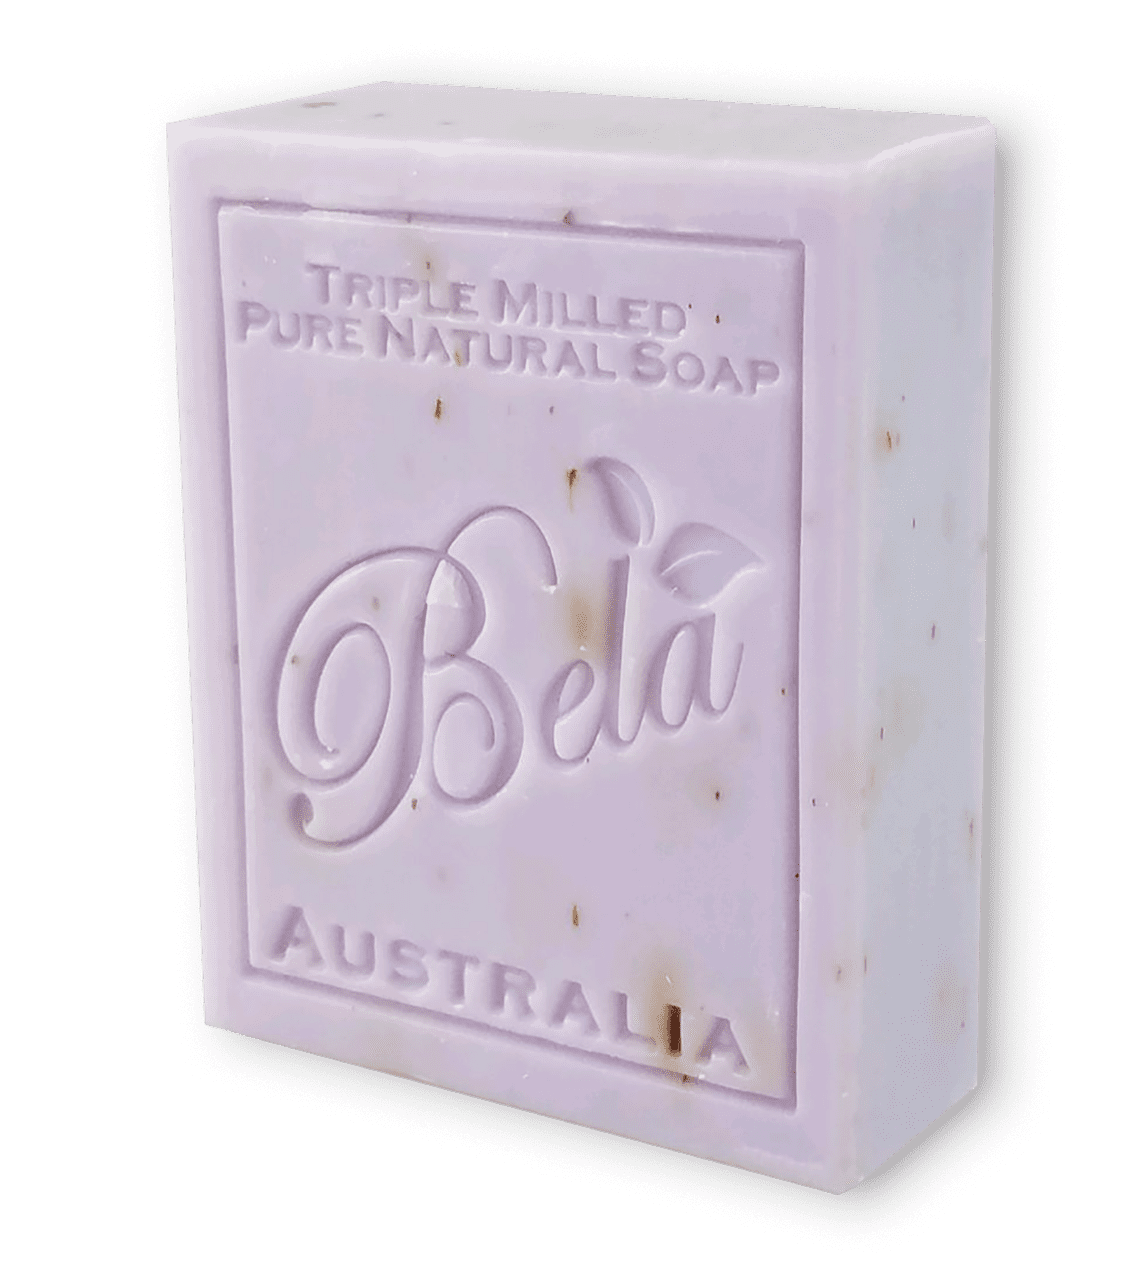 Money Soap Bar with Real Cash Inside Up to $100 Bill Inside in Each Bar -  Shea Butter Soap Refreshing Cucumber and Mint - Gift For Holidays